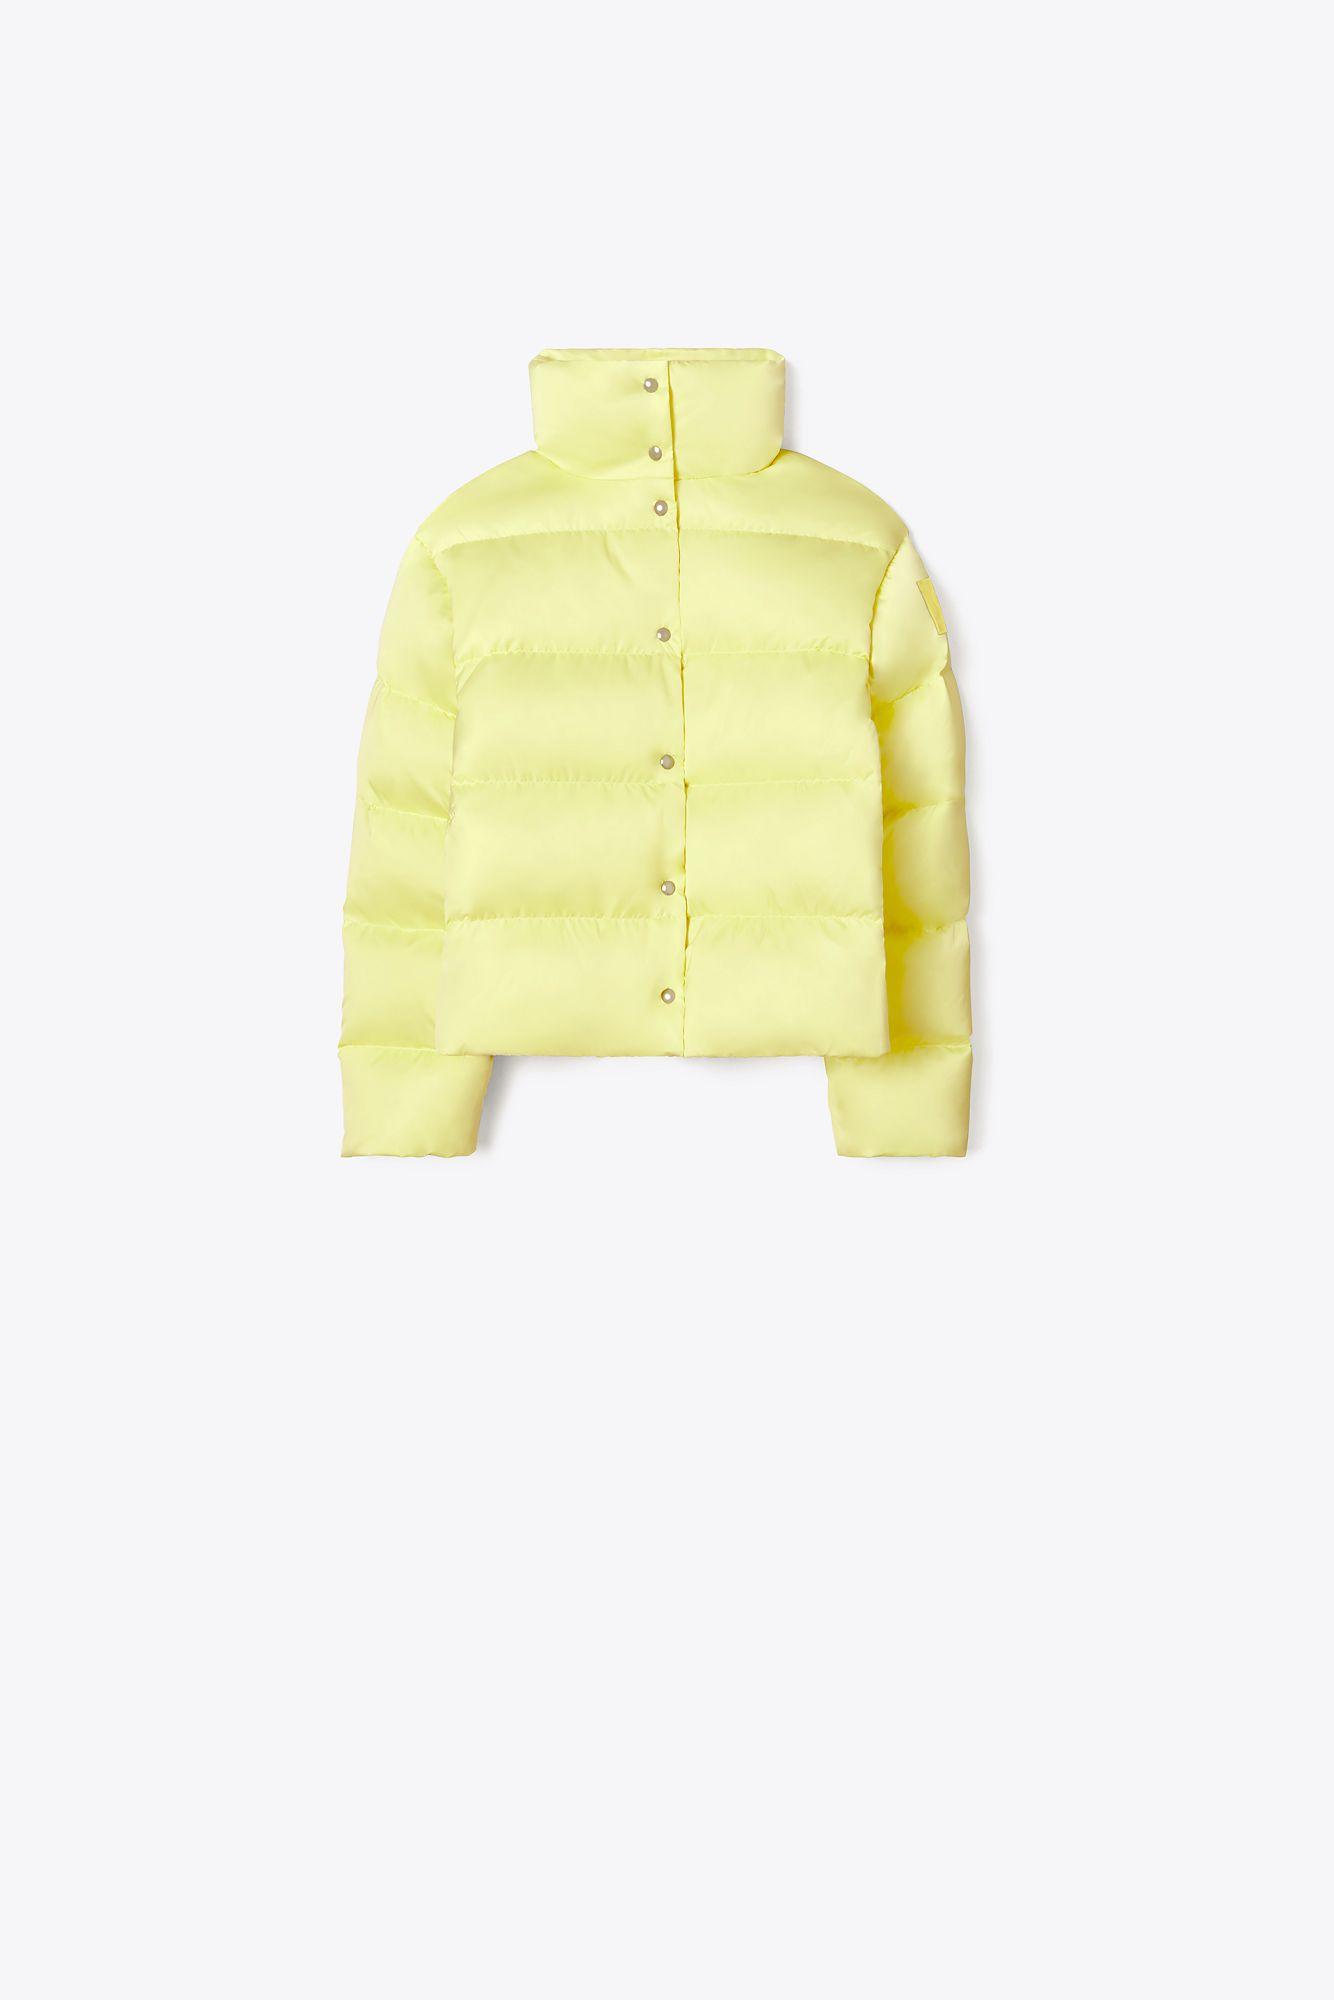 Tory Burch Performance Satin Down Jacket in Yellow | Lyst